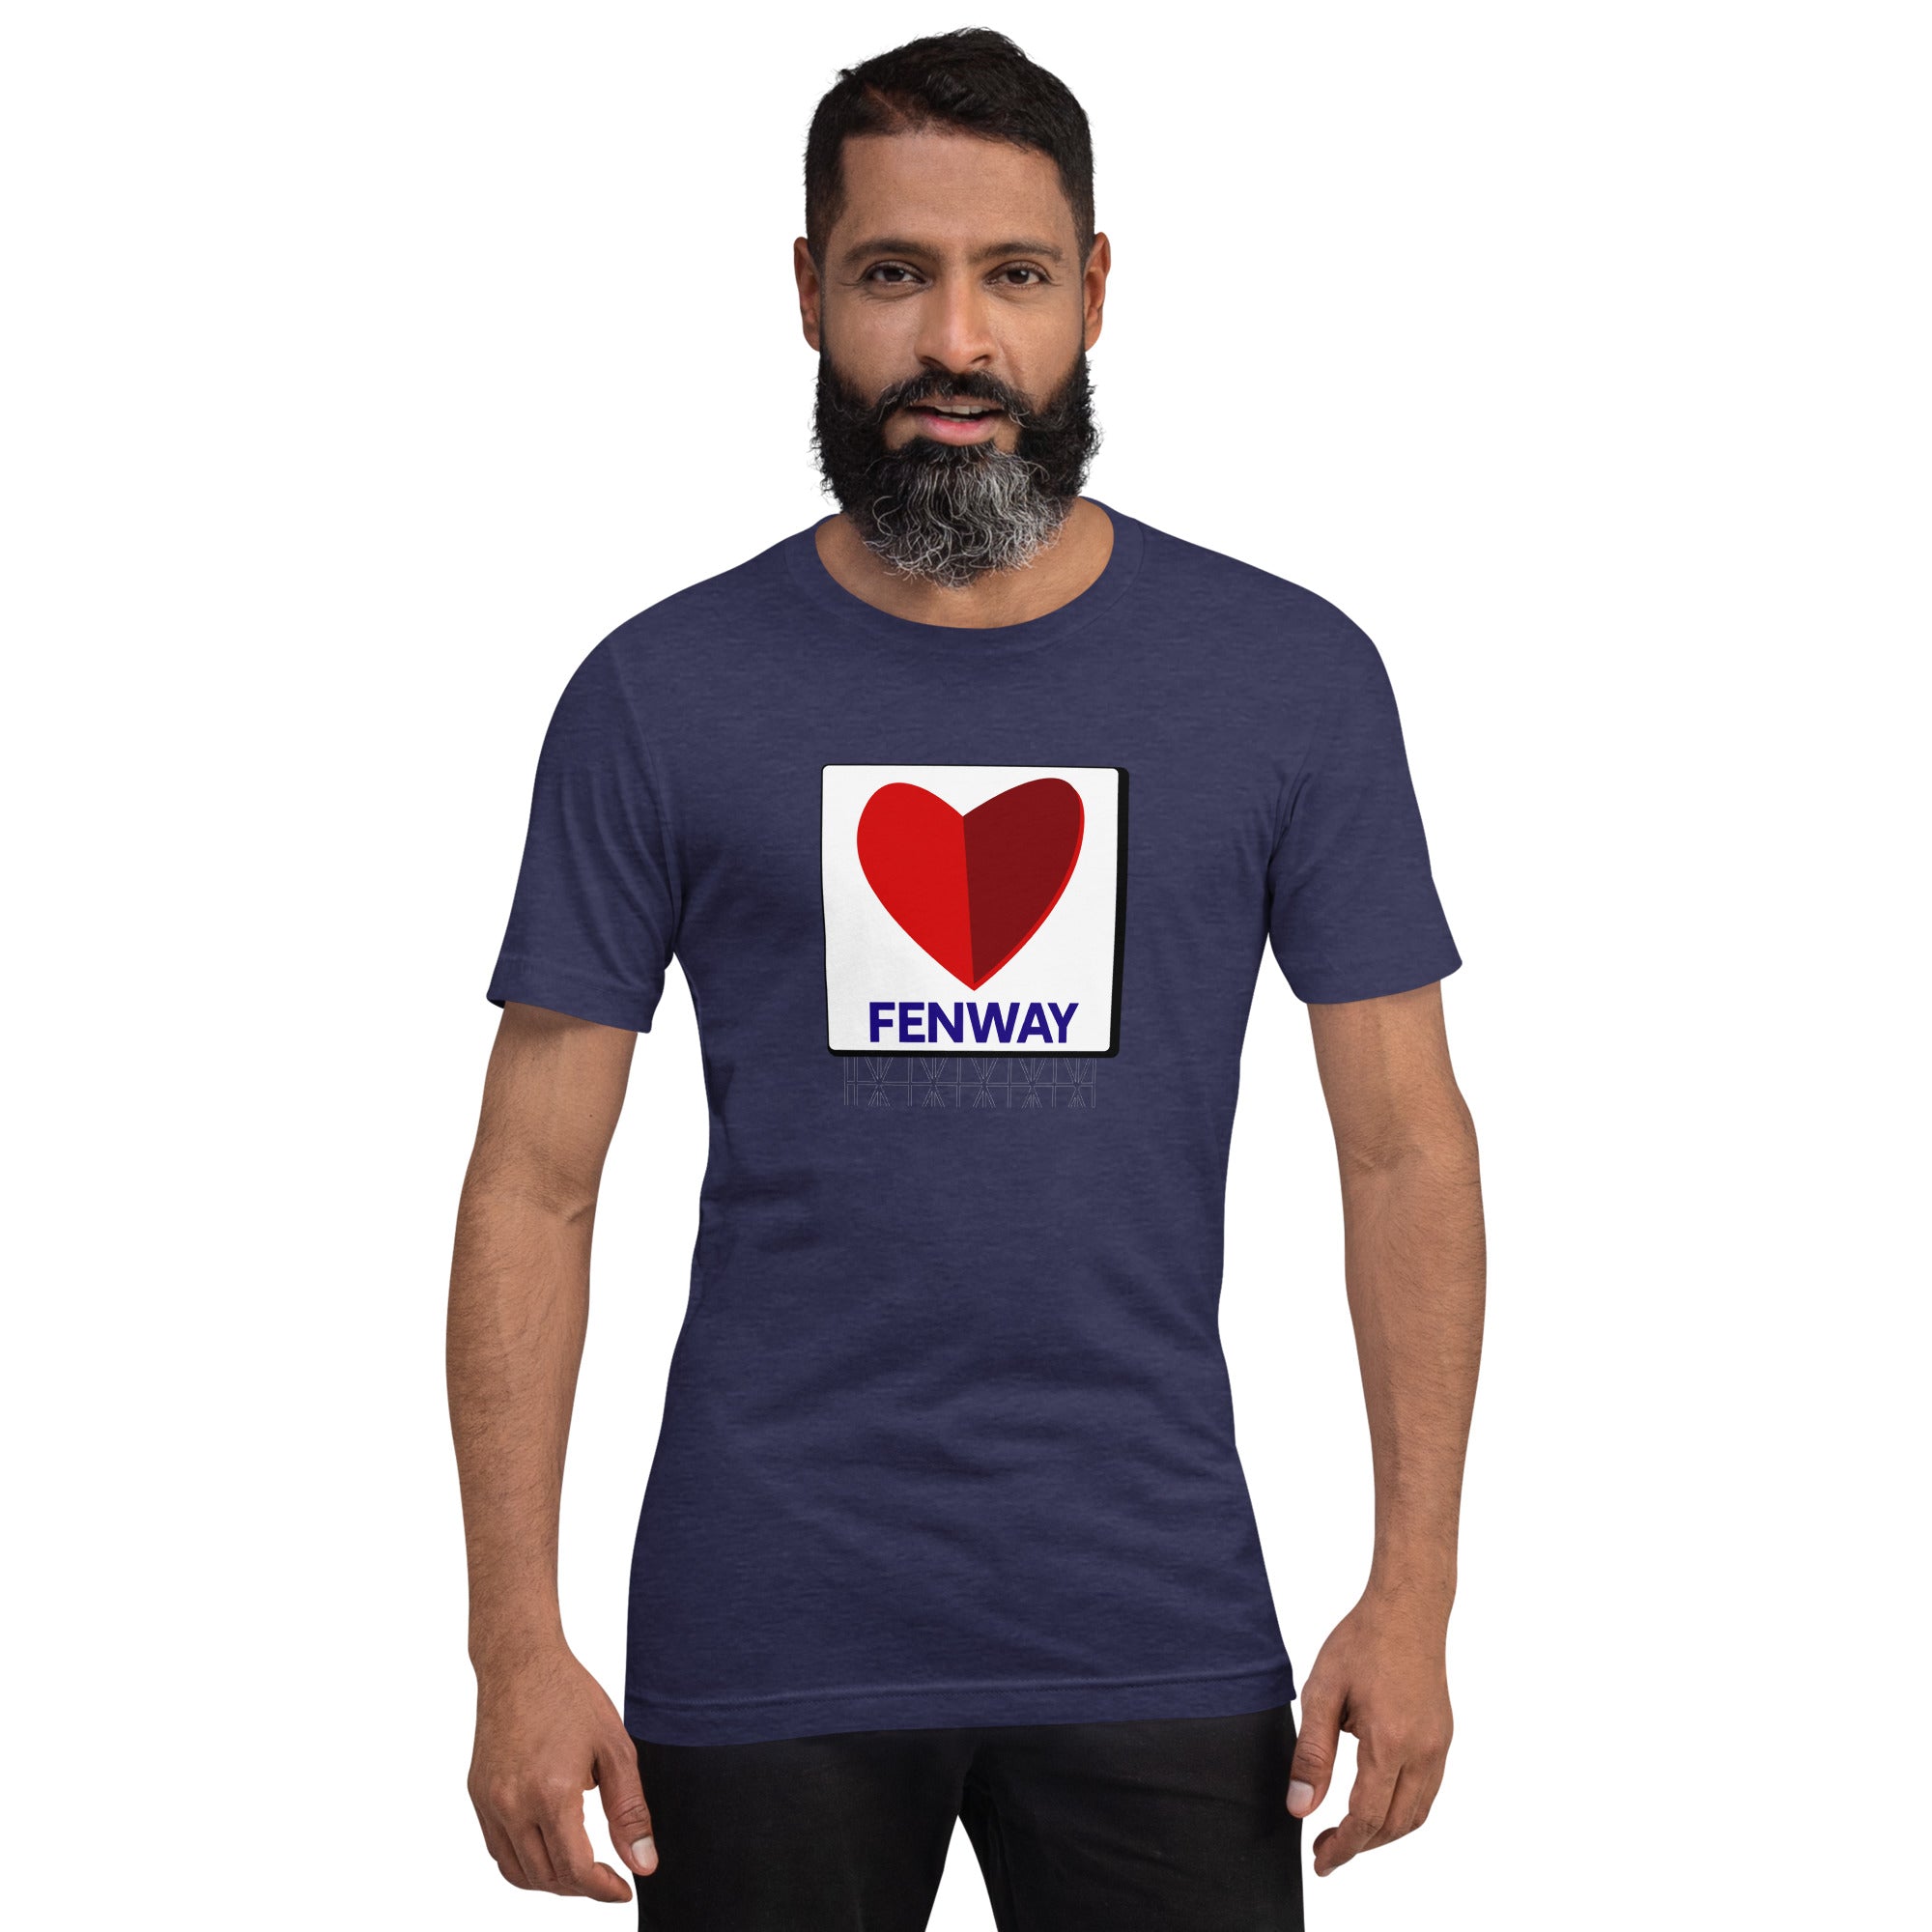 photo of man wearing navy blue t-shirt with graphic of the citgo sign boston fenway as a heart on navy unisex tshirt